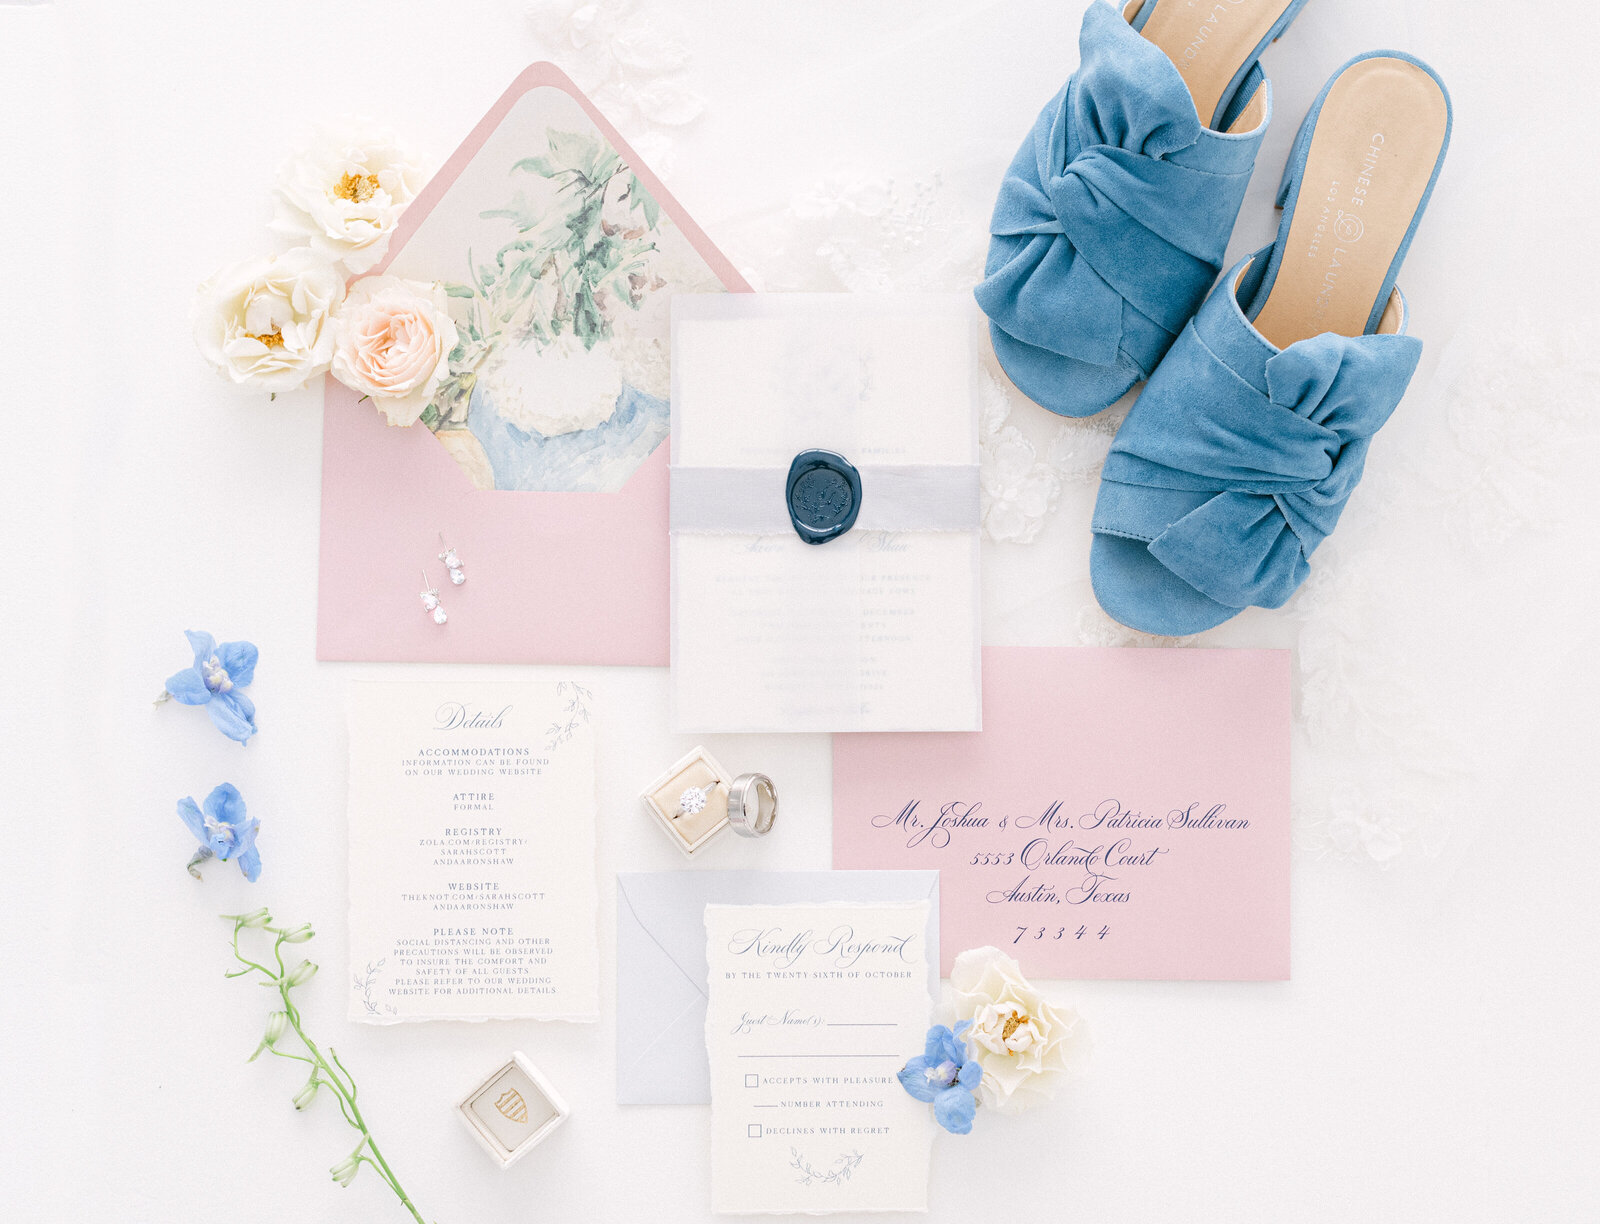 Portrait of various pink, white and blue wedding stationery with gray cursive font, blue heels, a wedding ring, and flowers